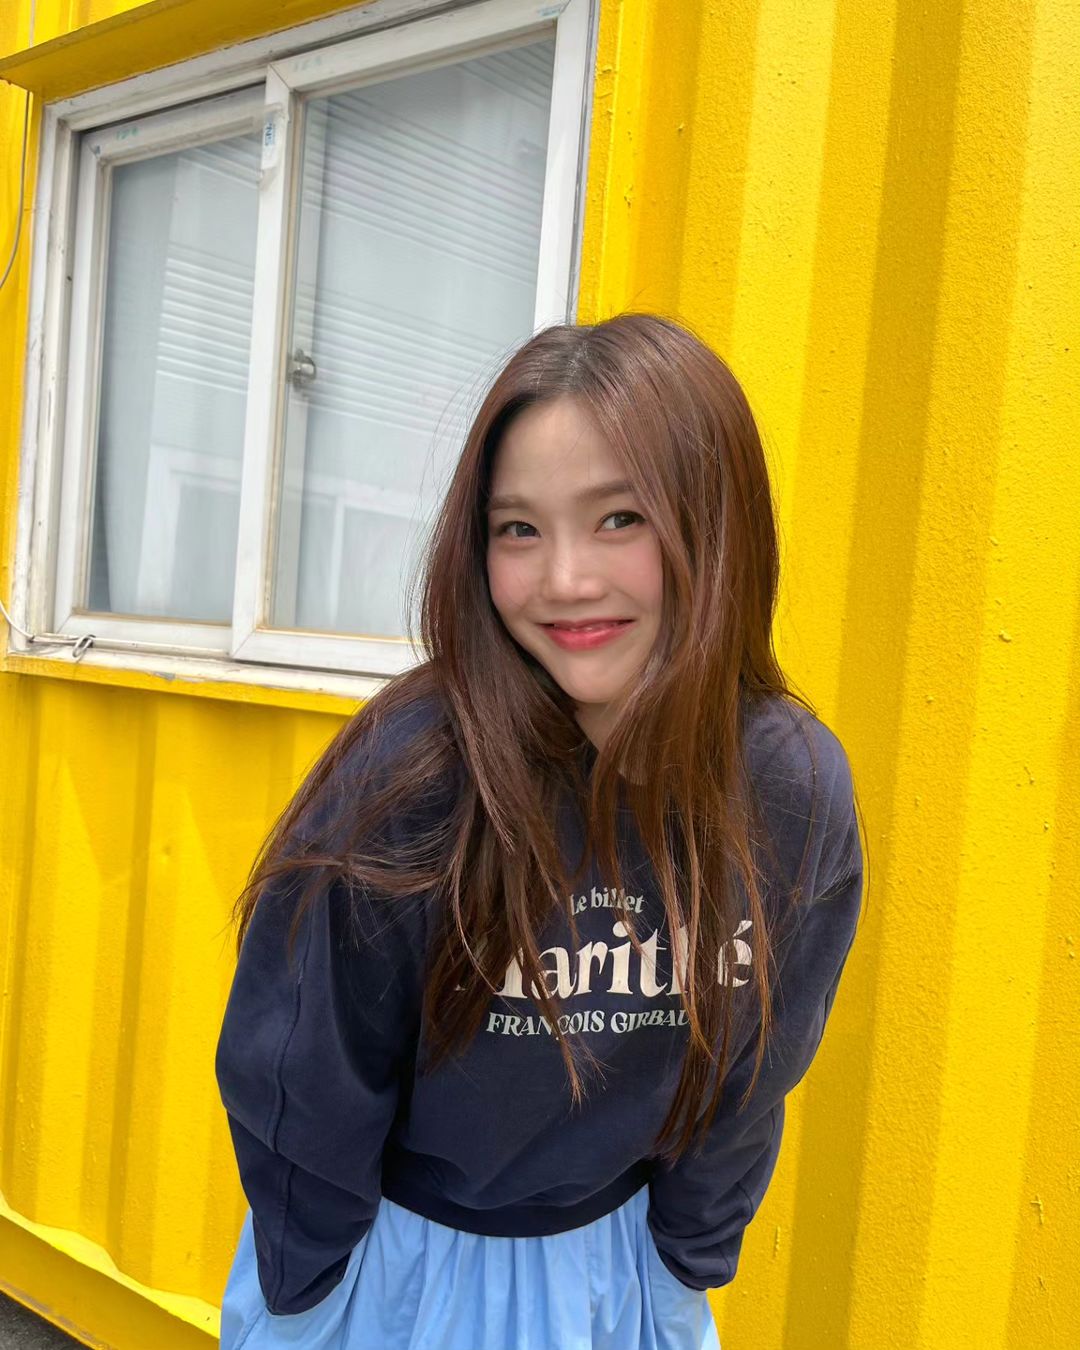 OH MY GIRL Hyojung, full of cuteness and eye smiles.. I thought she was a doll